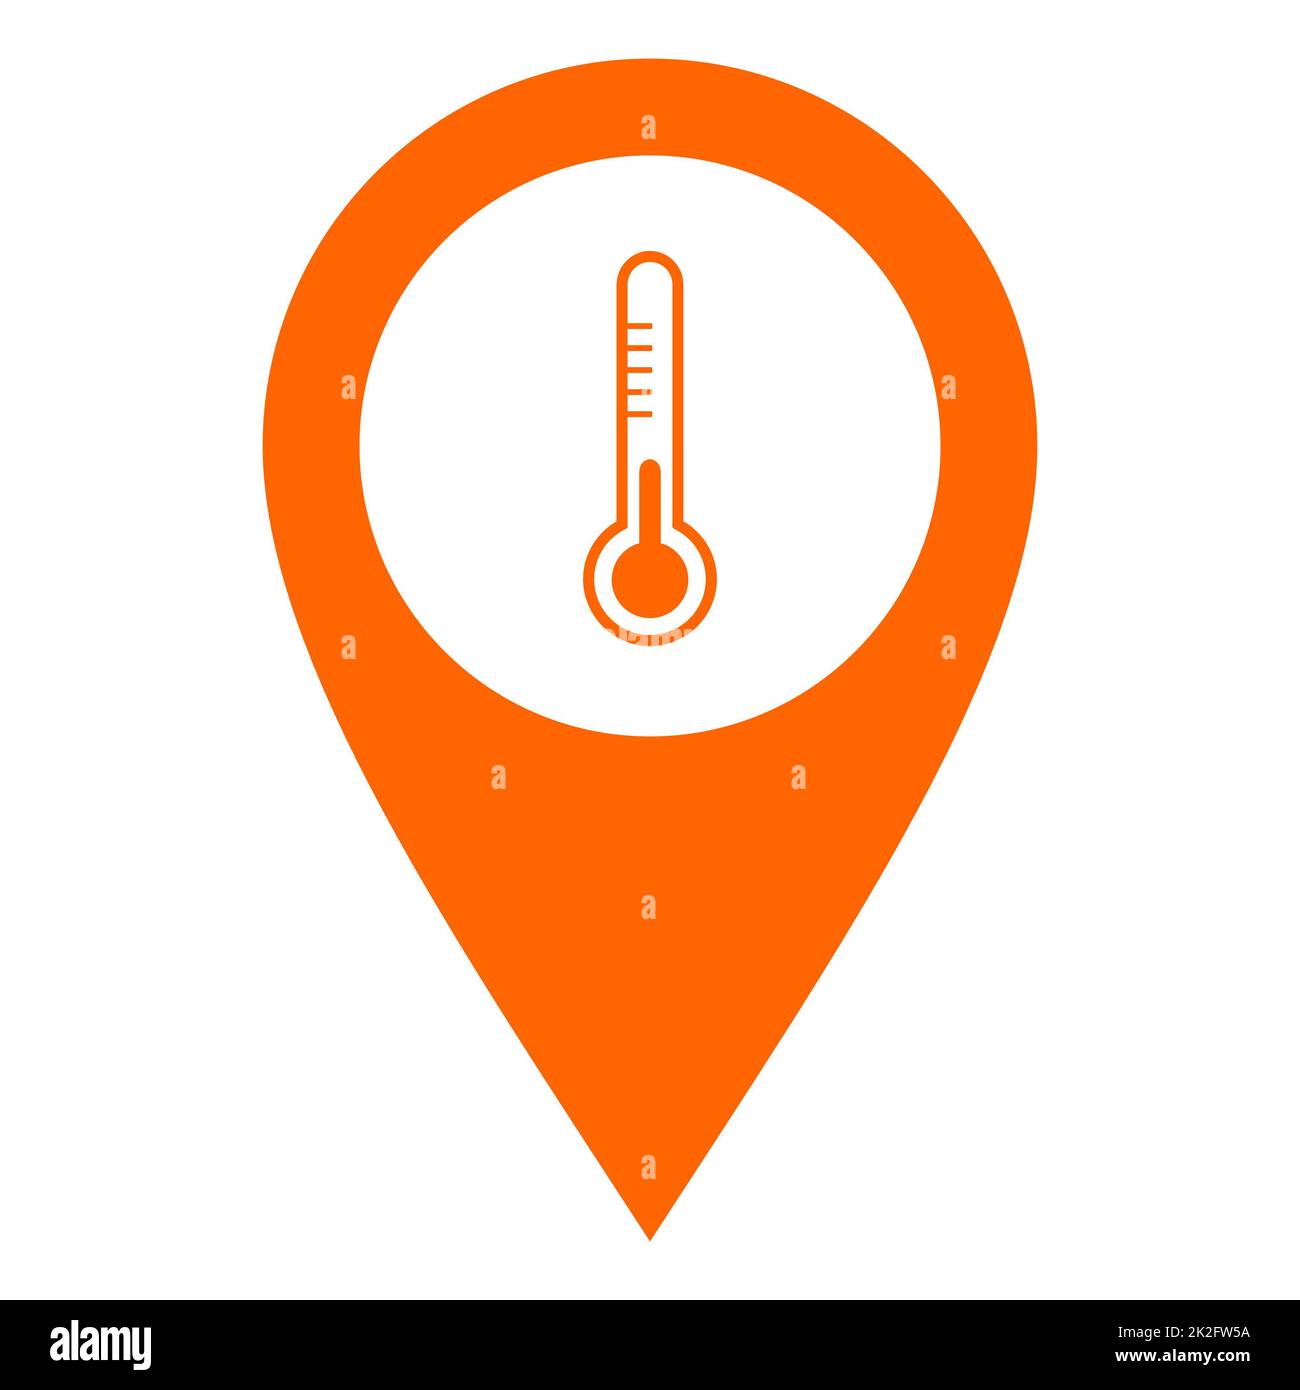 Thermometer and location pin Stock Photo